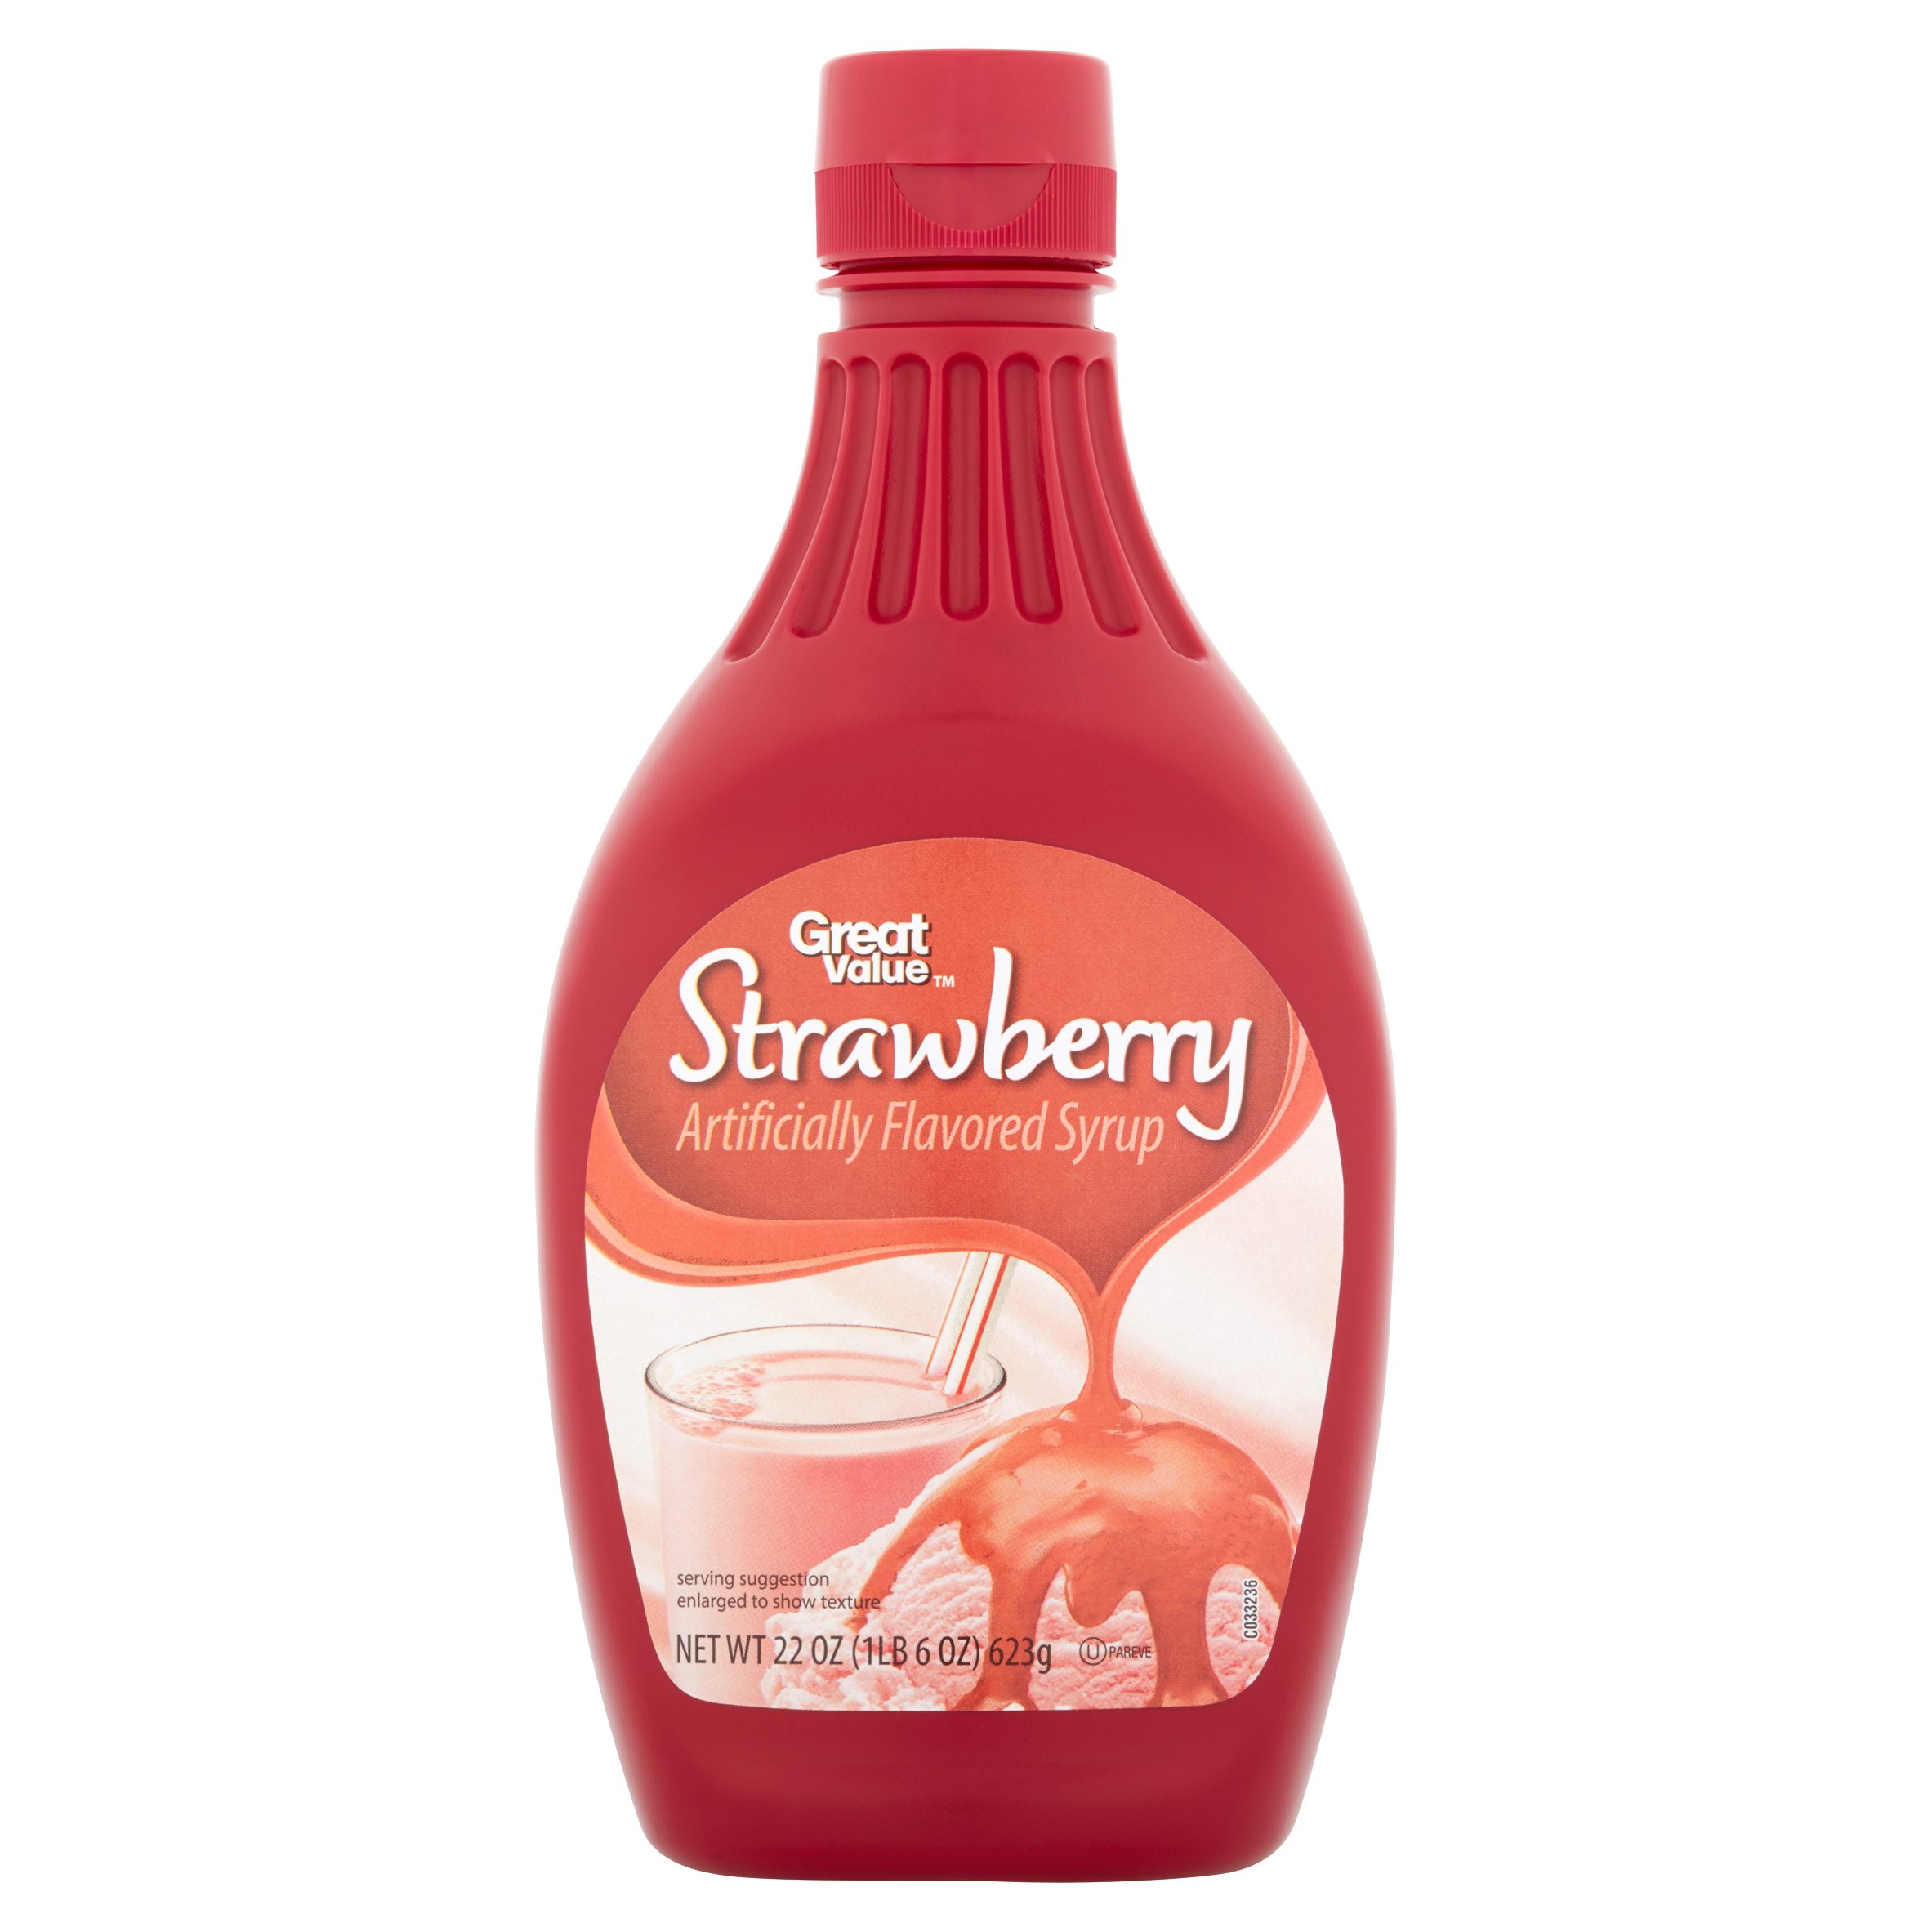 (2 Pack) Great Value Strawberry Artificially Flavored Syrup, 22 Oz Image